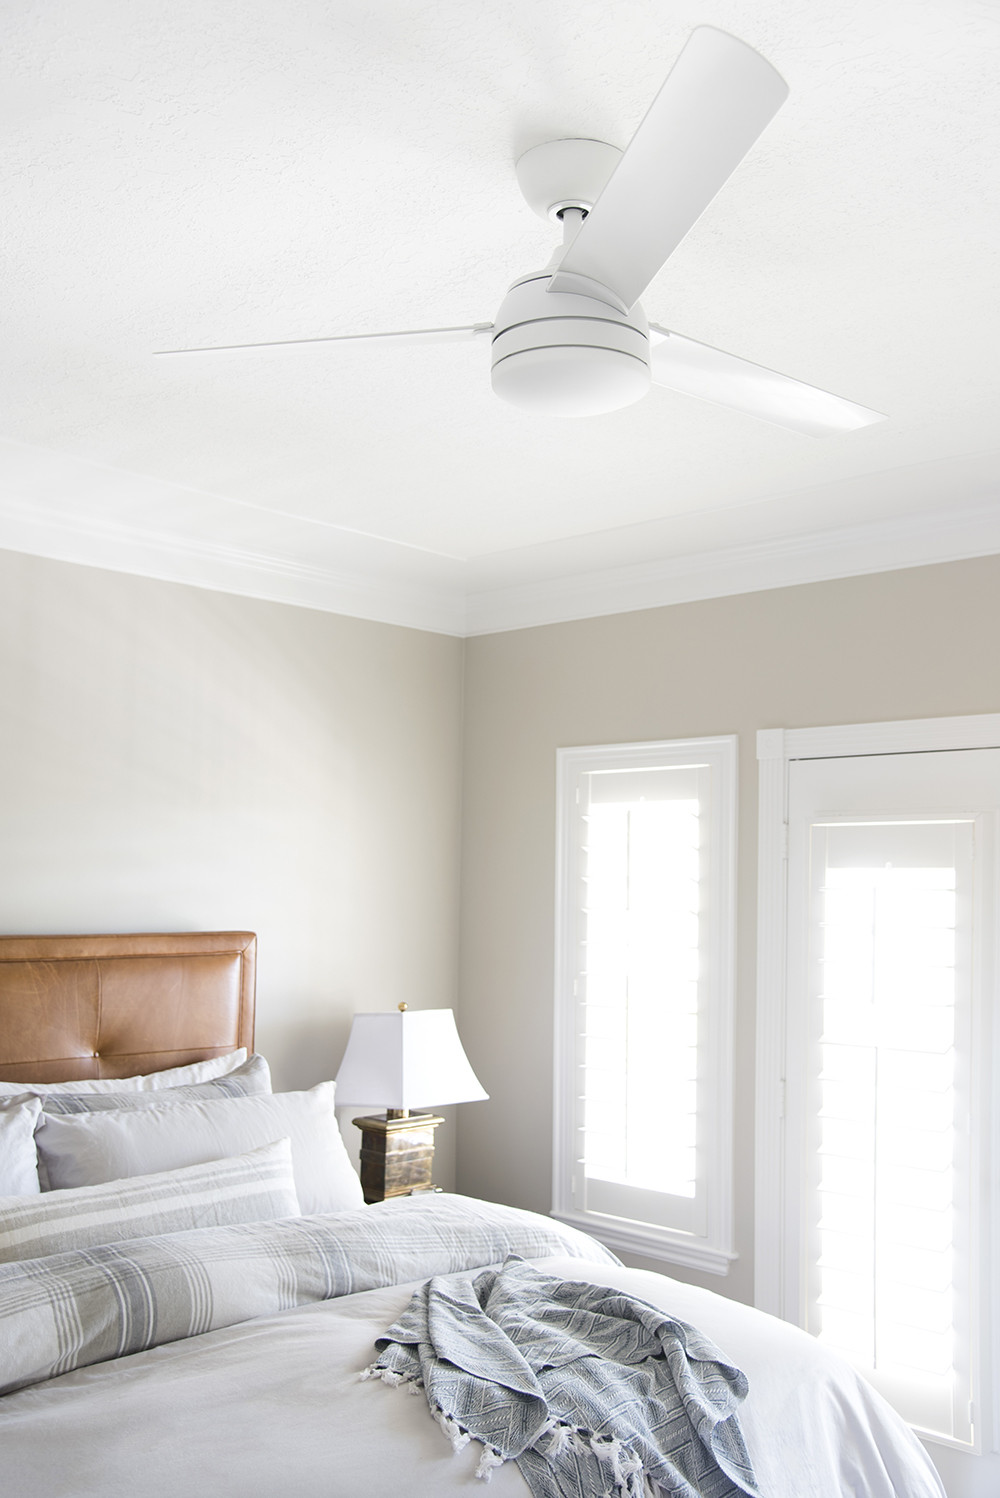 Lowes Bedroom Lighting
 Ceiling Fan From Lowe s in Bedroom Room For Tuesday